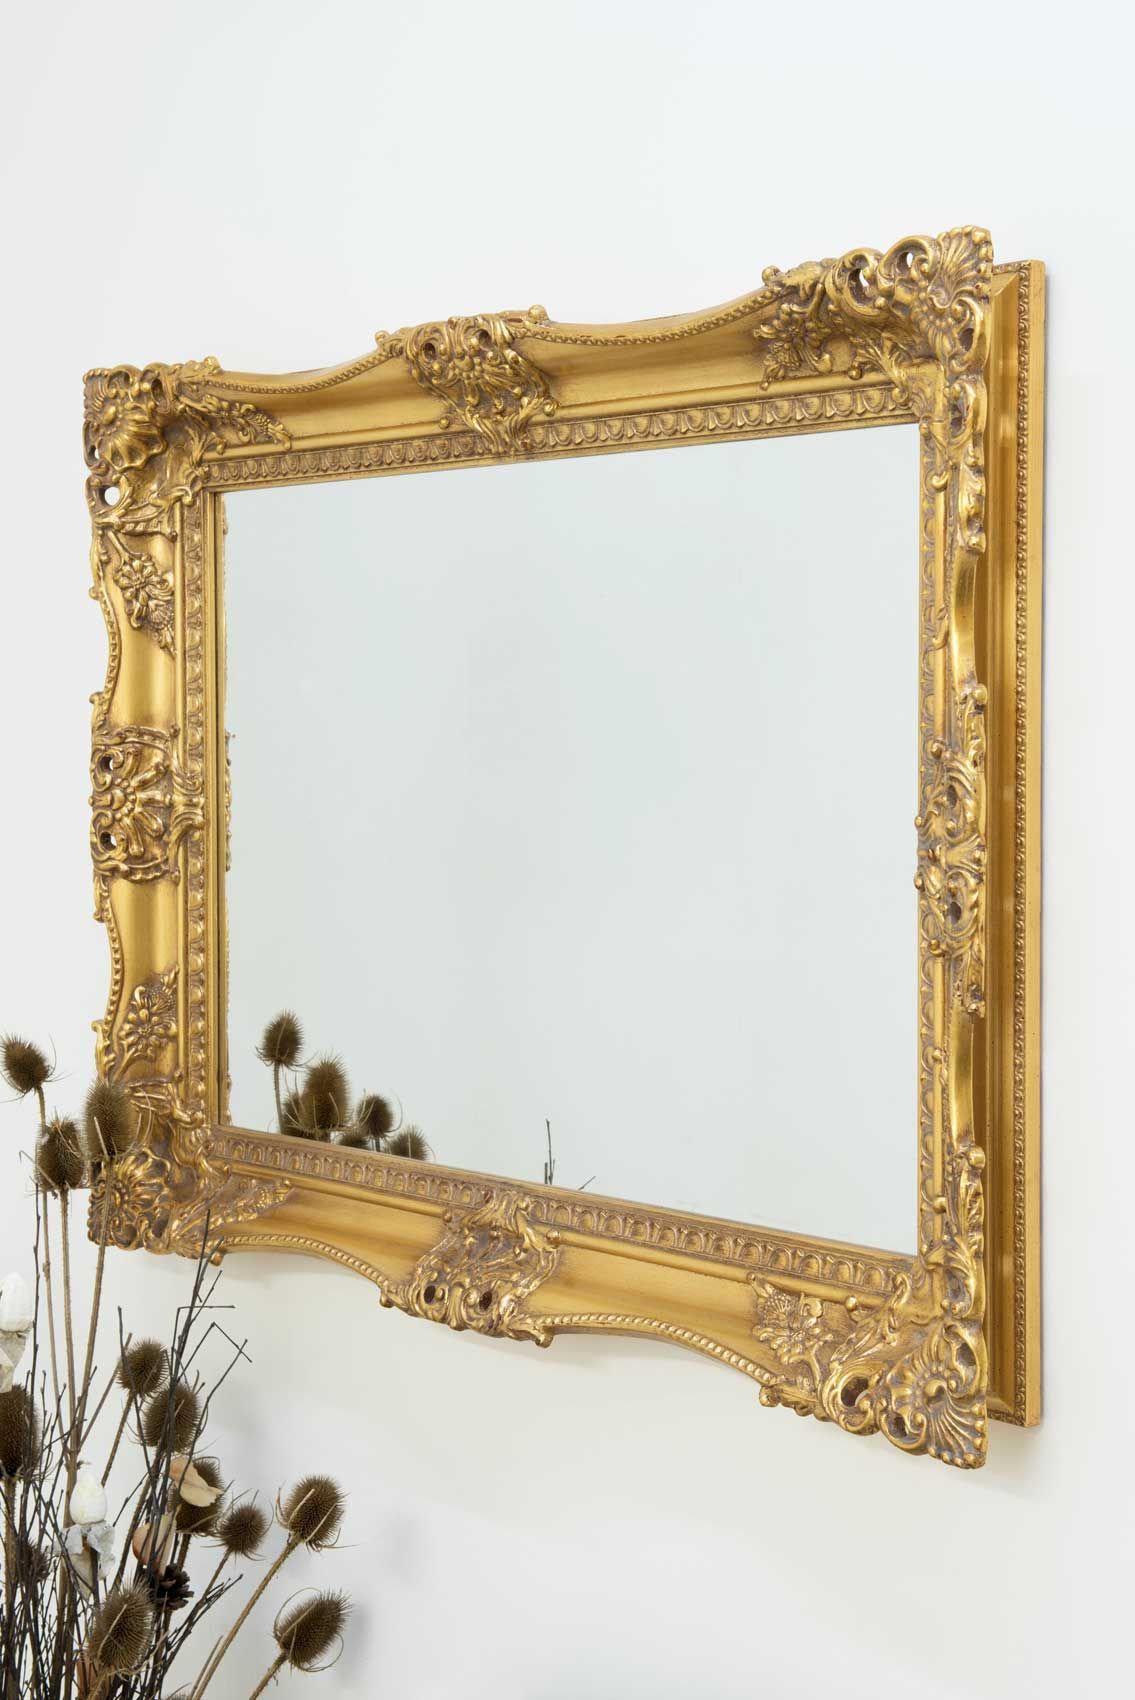 Extra Large Gold Ornate Vintage Wall Mirror 3Ft1 X 2Ft3, 94Cm X 68Cm Inside Oversized Wall Mirrors (View 10 of 15)